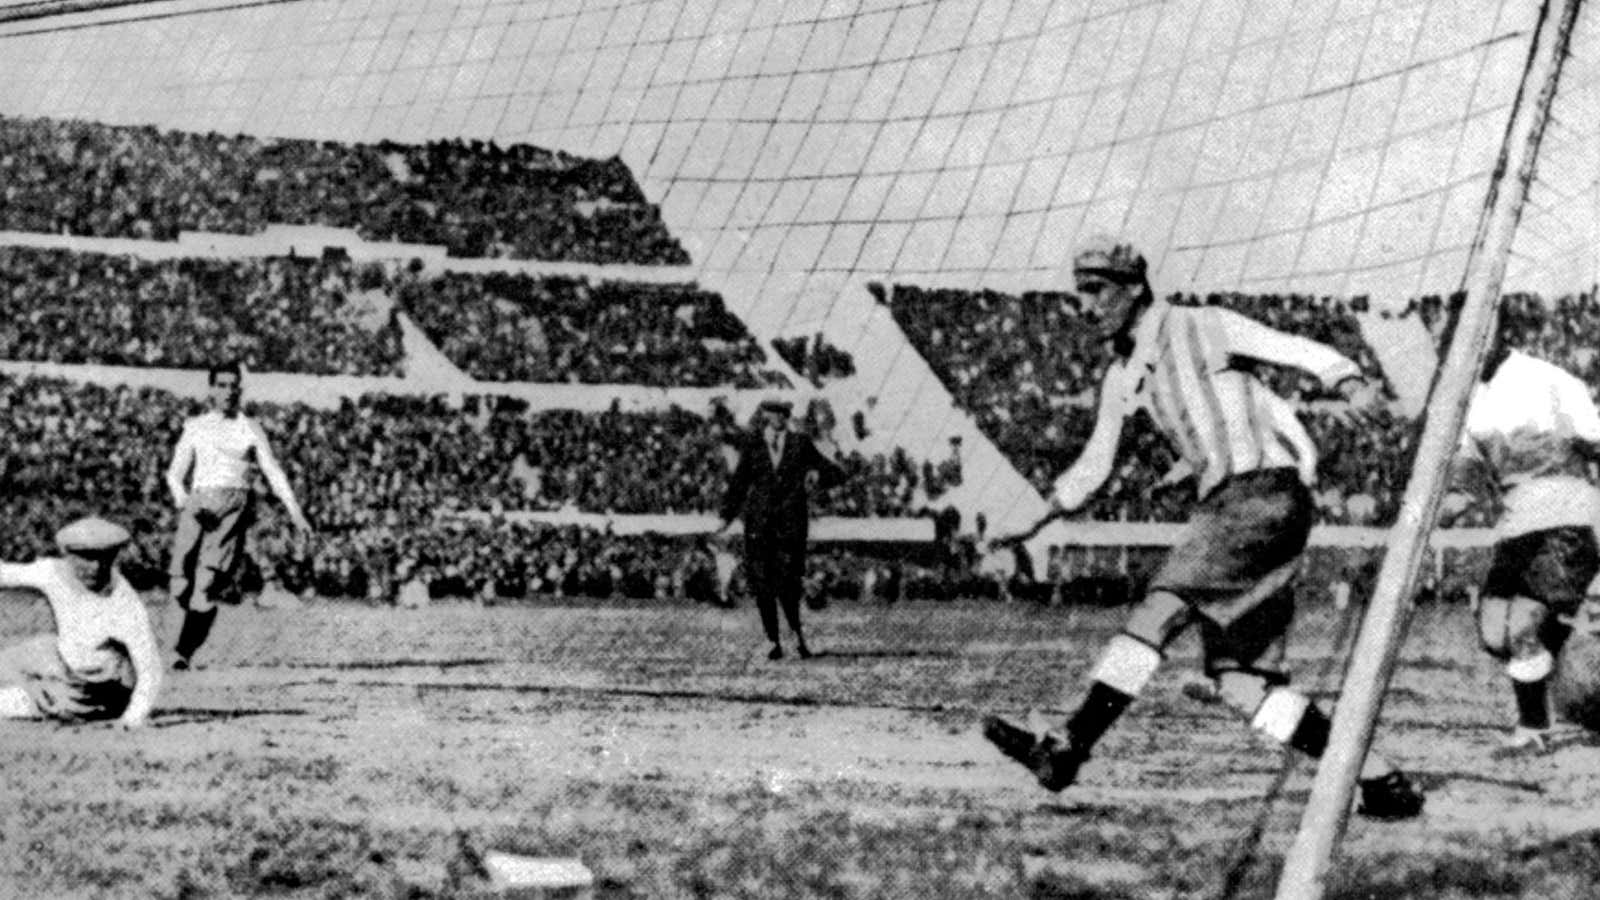 Uruguay’s first goal in the World Cup Final against Argentina, in Montevideo, Uruguay, July 30, 1930. Uruguay defeated Argentina by four goals to two. (AP Photo)